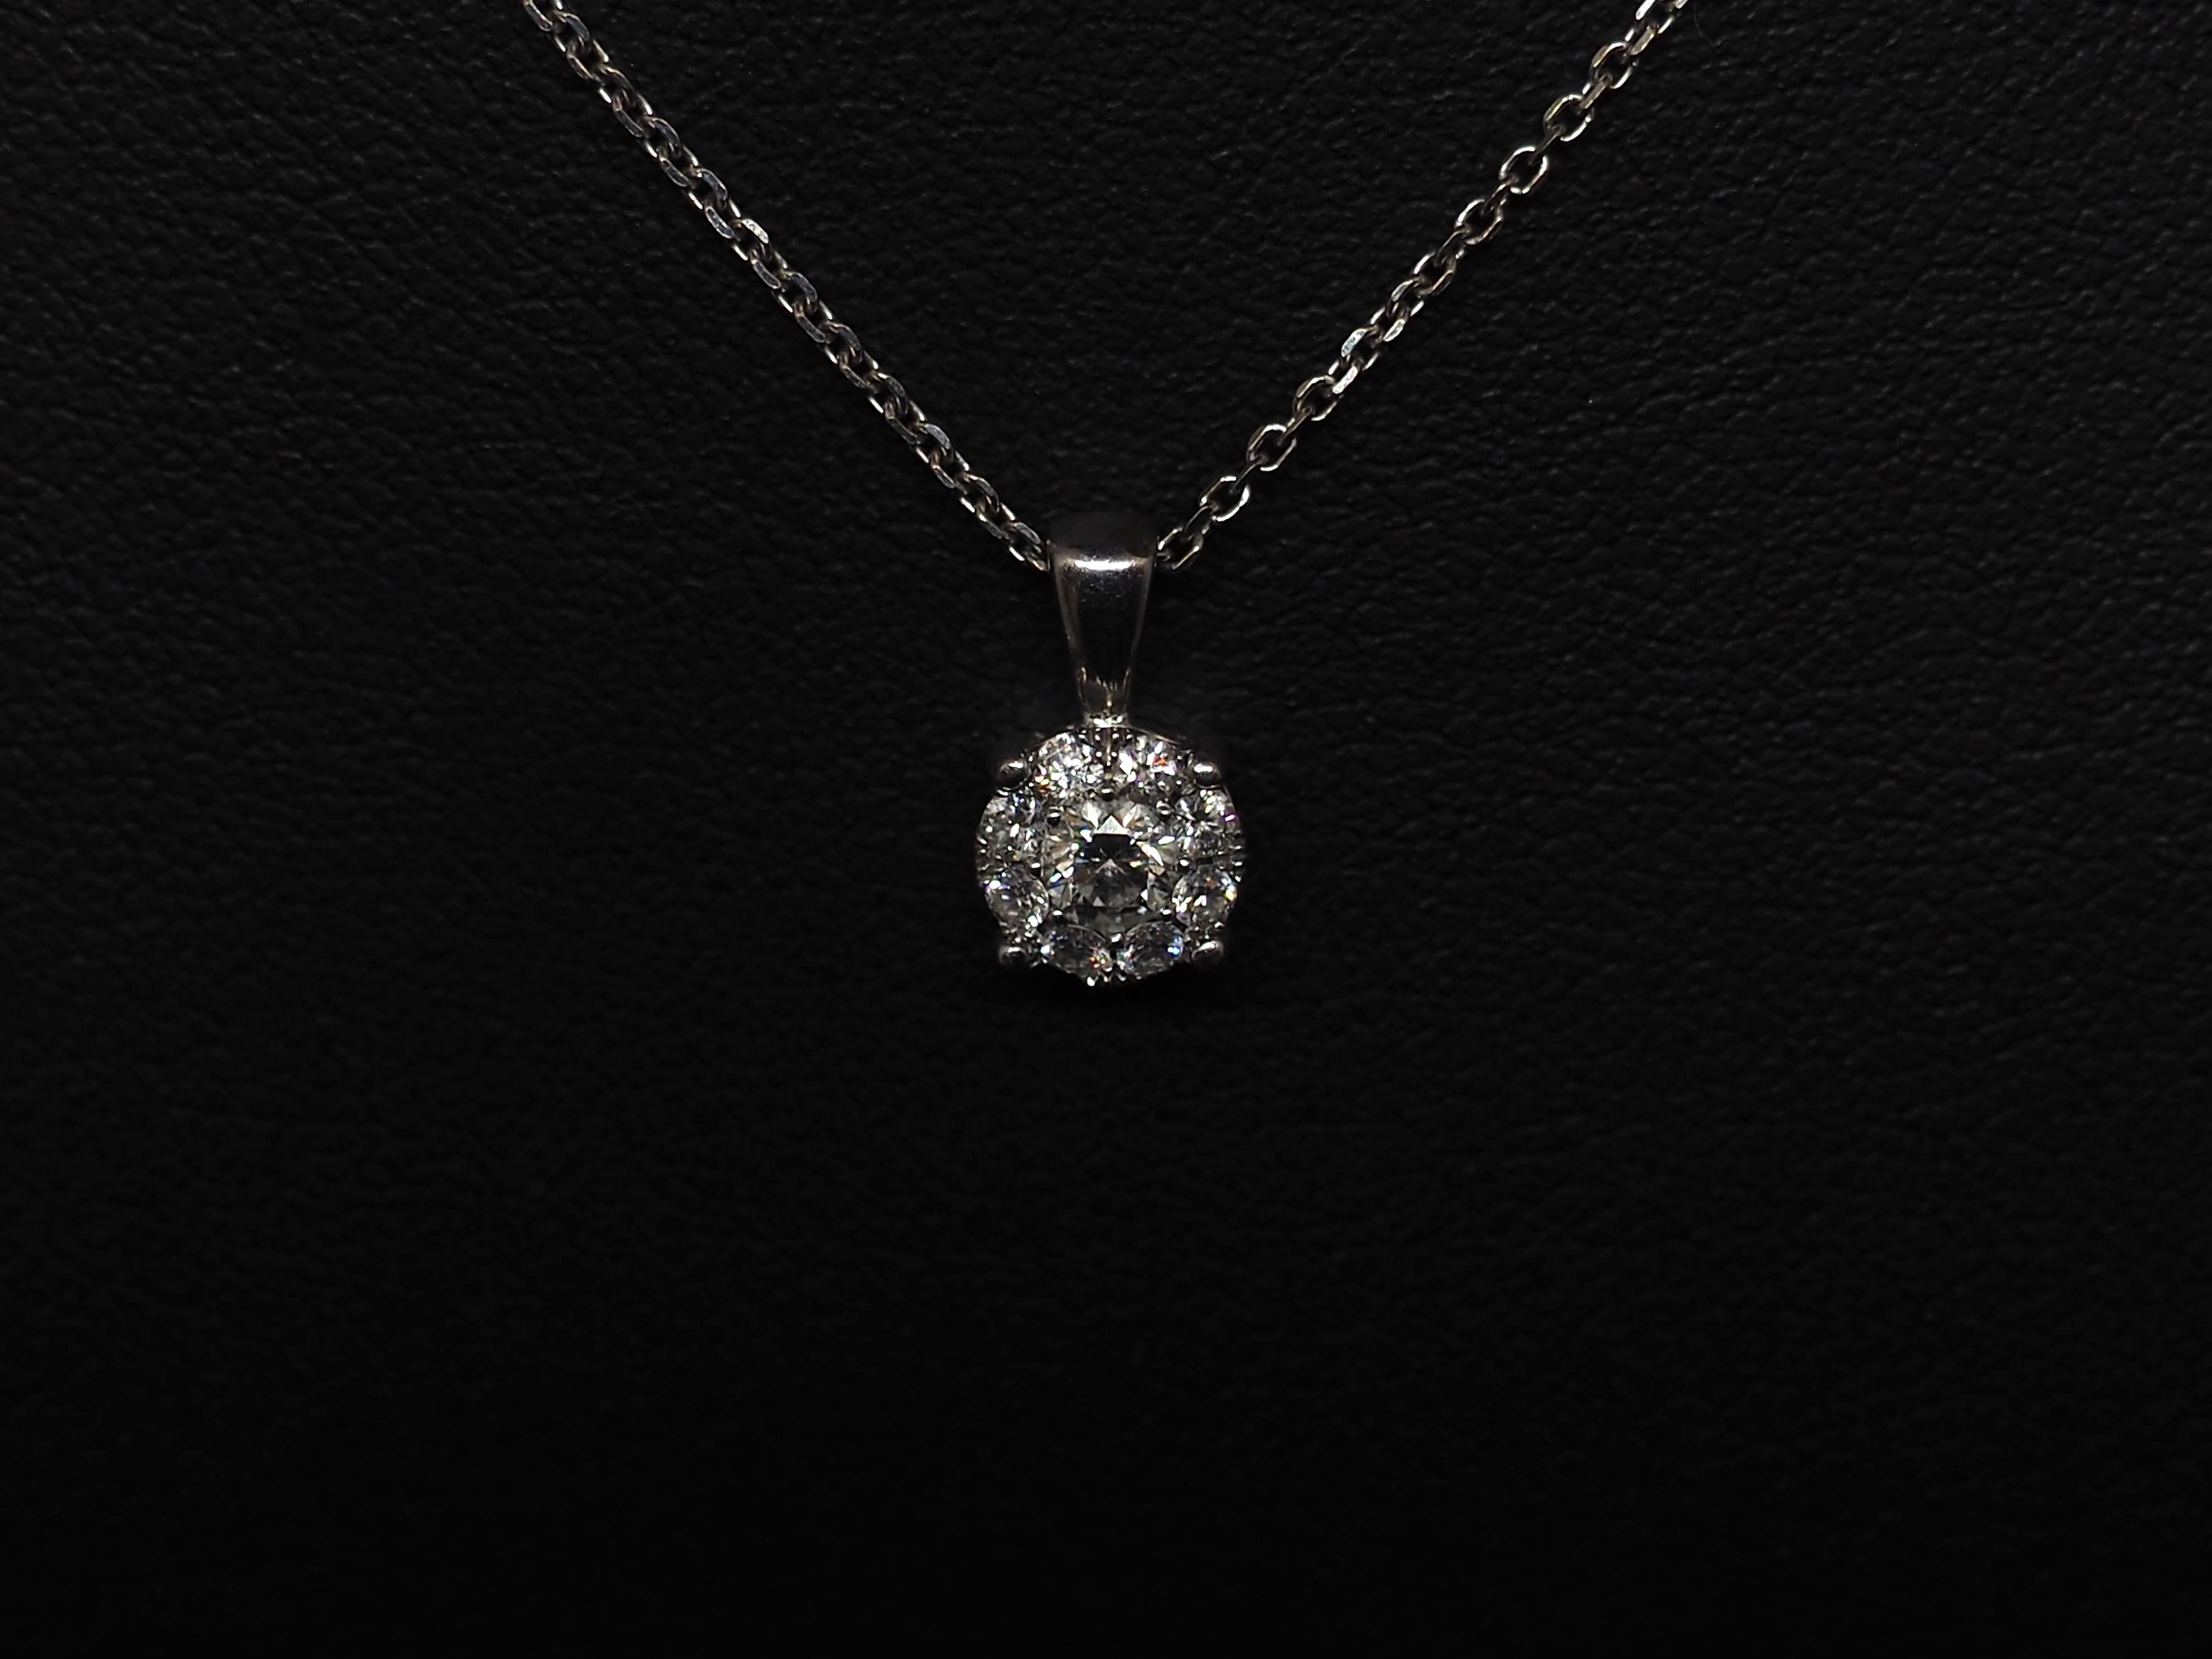 Diamond Pendant Necklace 18 Katat
Add a touch of sparkle and shine to any outfit with this beautiful 18k gold chain. Crafted from solid 18k gold, this chain necklace is thinner in design making it perfect for layering or solo wear. 
The sparkling